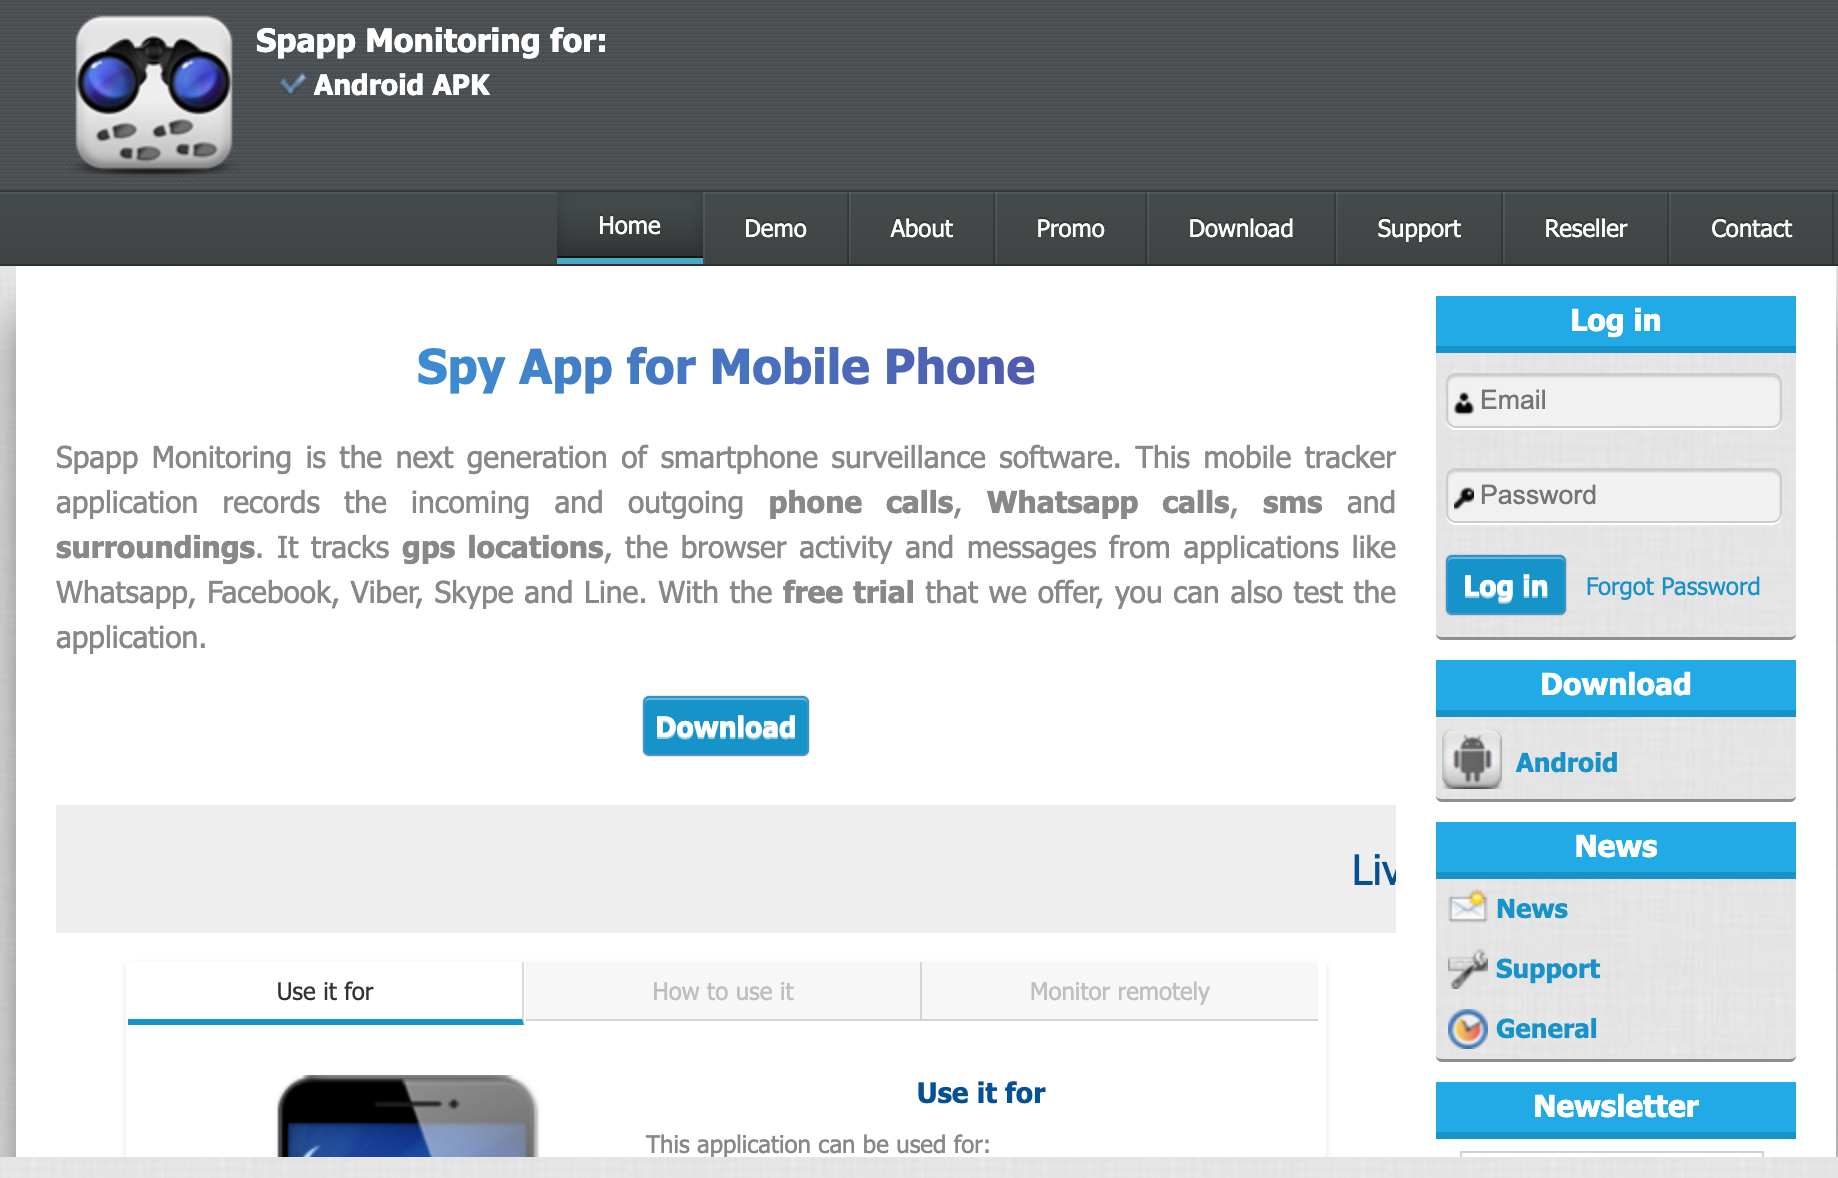 Spapp Monitoring is one of the fastest syncing spying apps in the market.